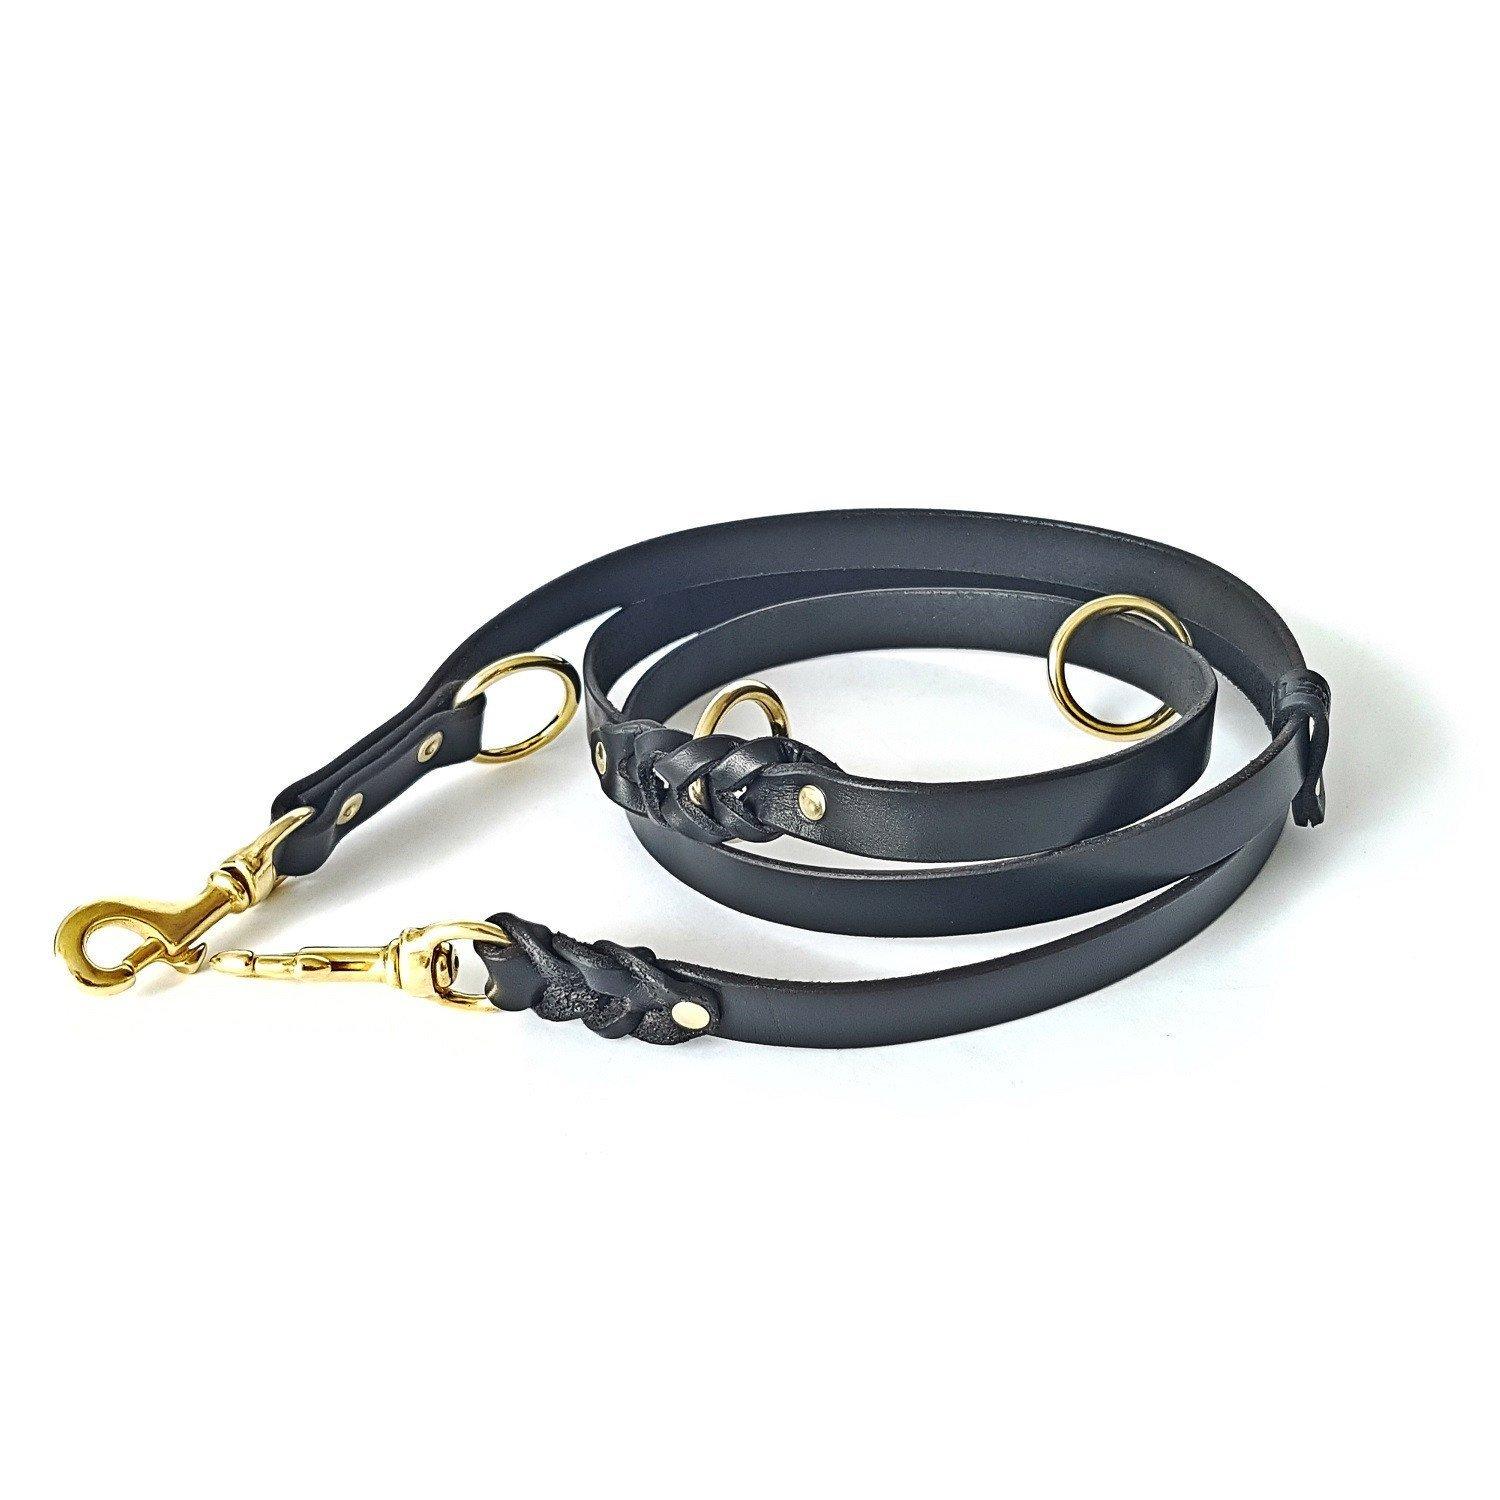 Bestia 6 feet Dual snap Multi Purpose Leather Dog Leash. Heavy Duty & Ever Lasting, 10+ Different uses! Out of Thick but Soft Quality Buffalo Leather. Handmade in Europe